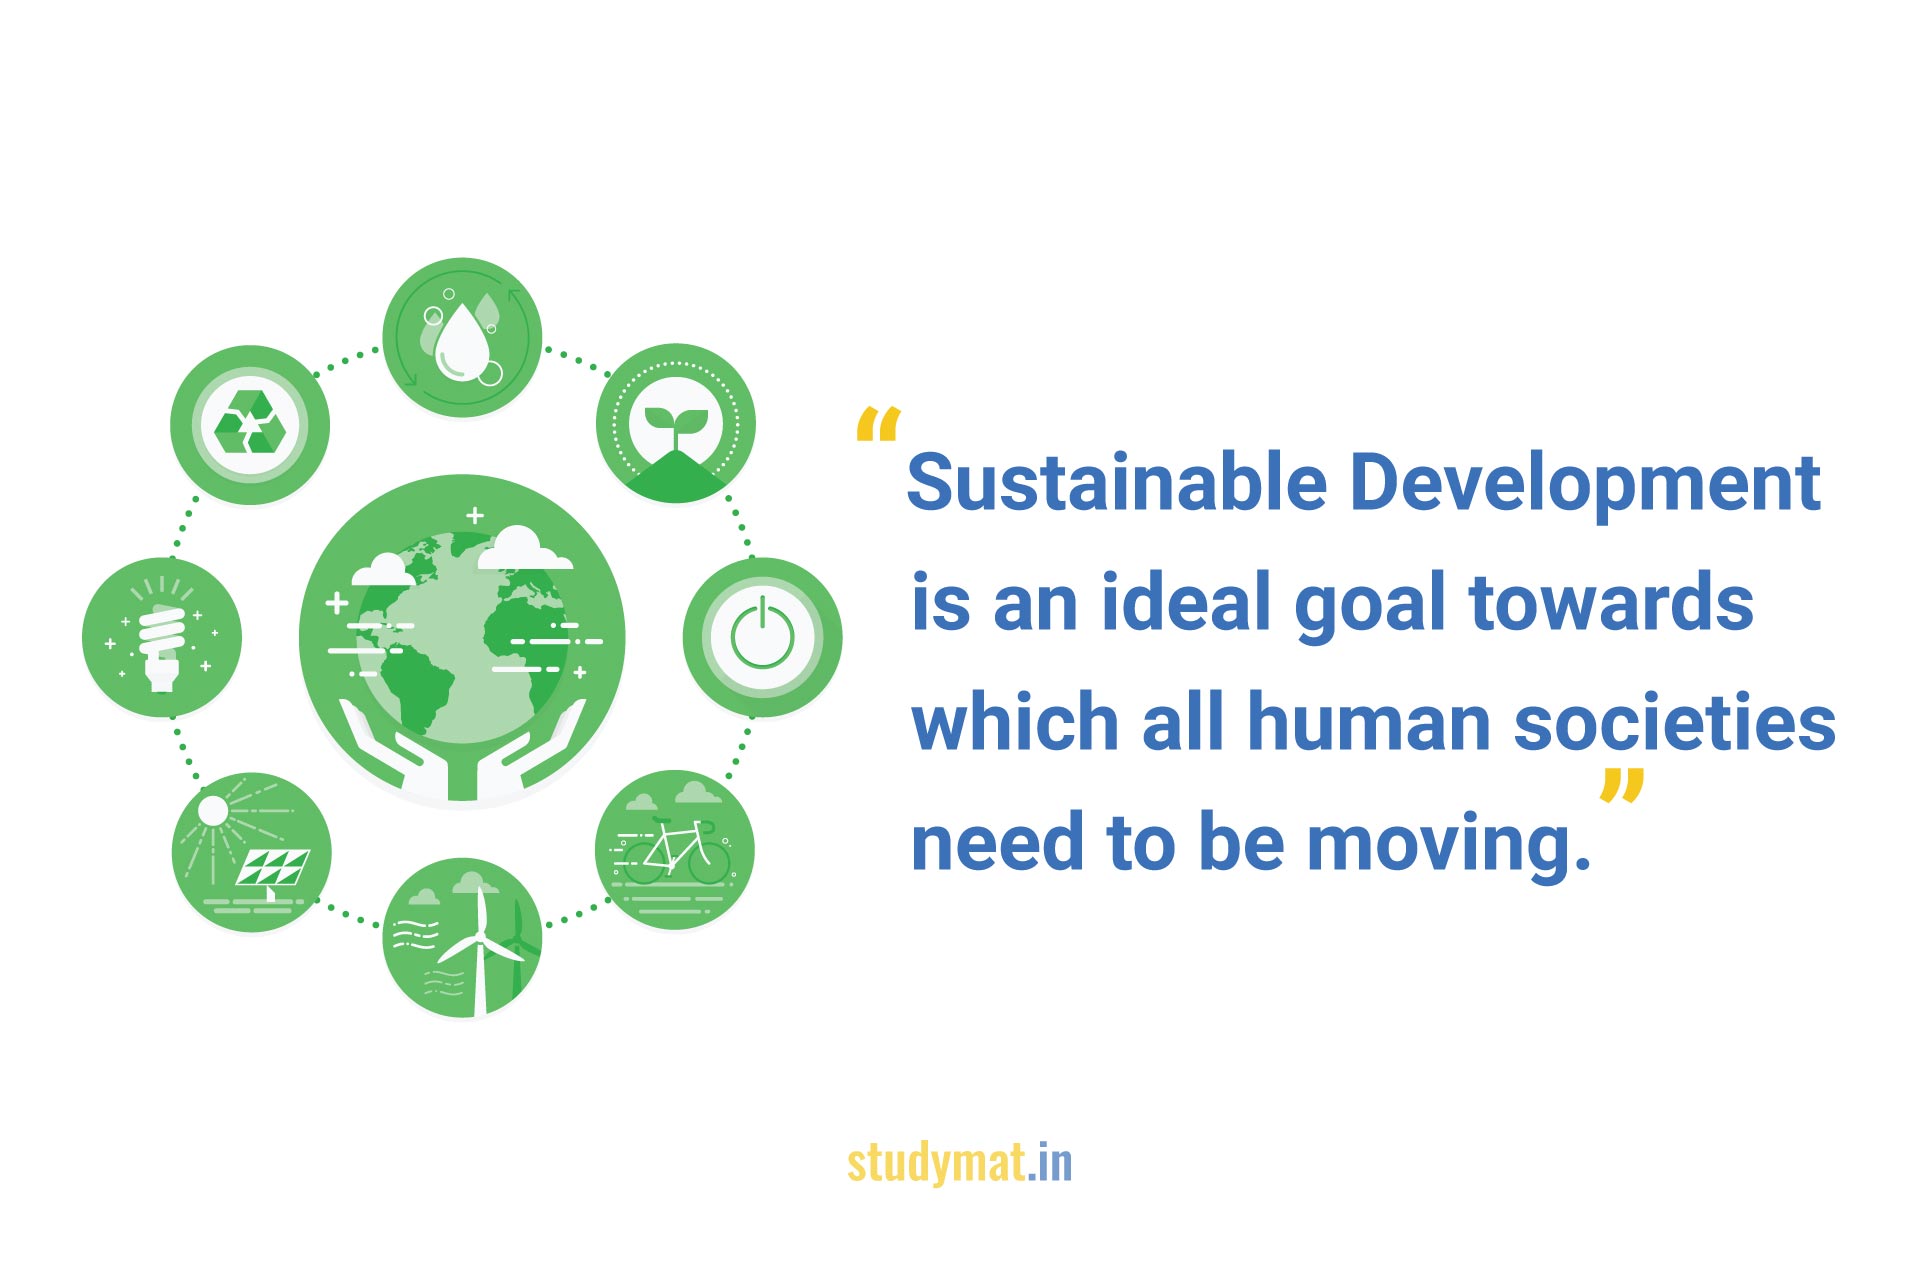 Sustainable Development is an ideal goal towards which all human societies need to be moving.